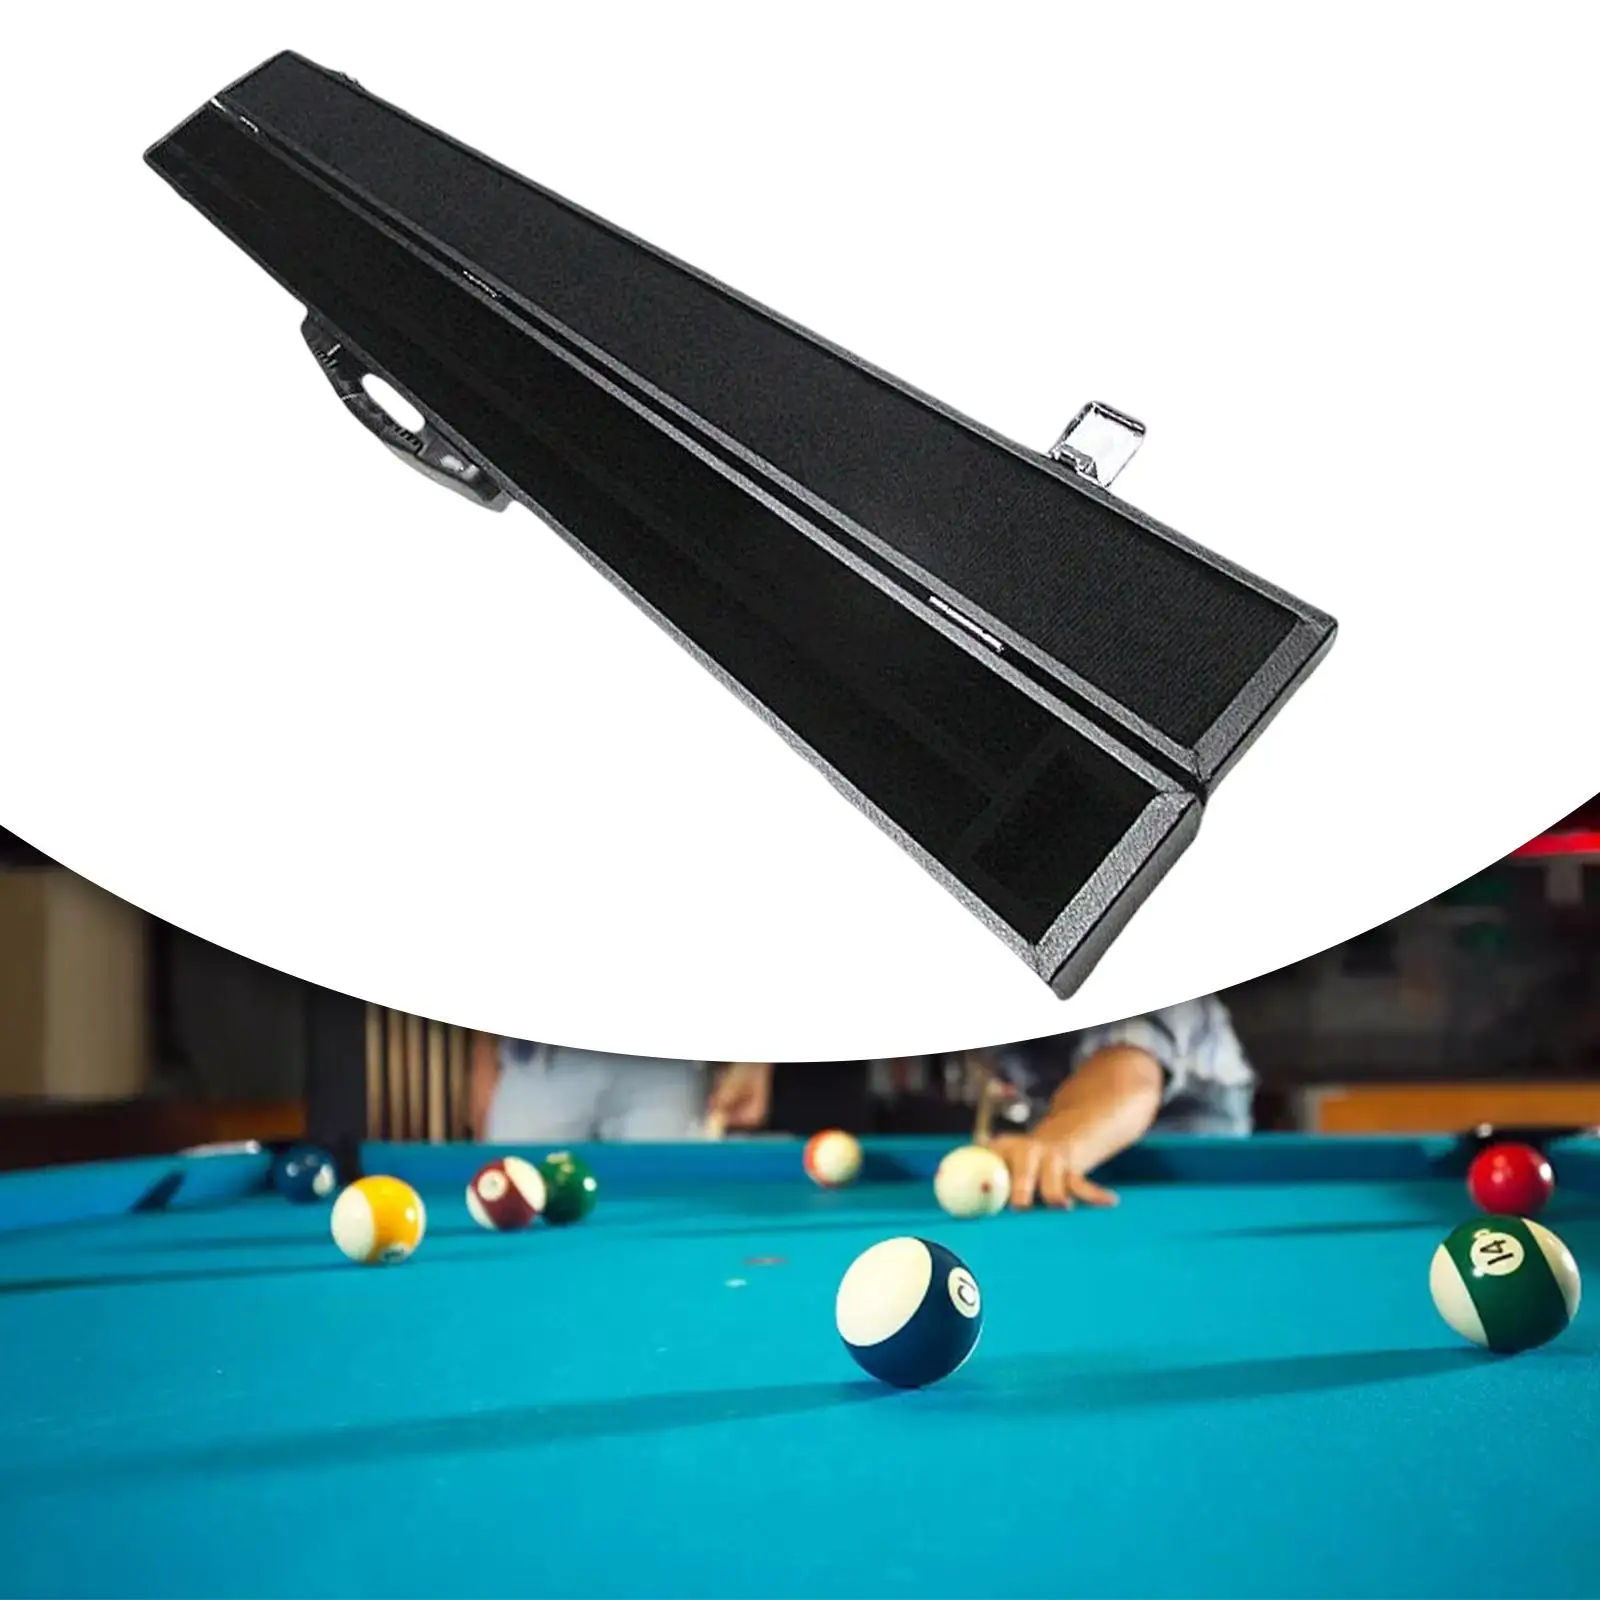 Case Heavy Duty For Billiards Holds One Two Piece Pool Cue